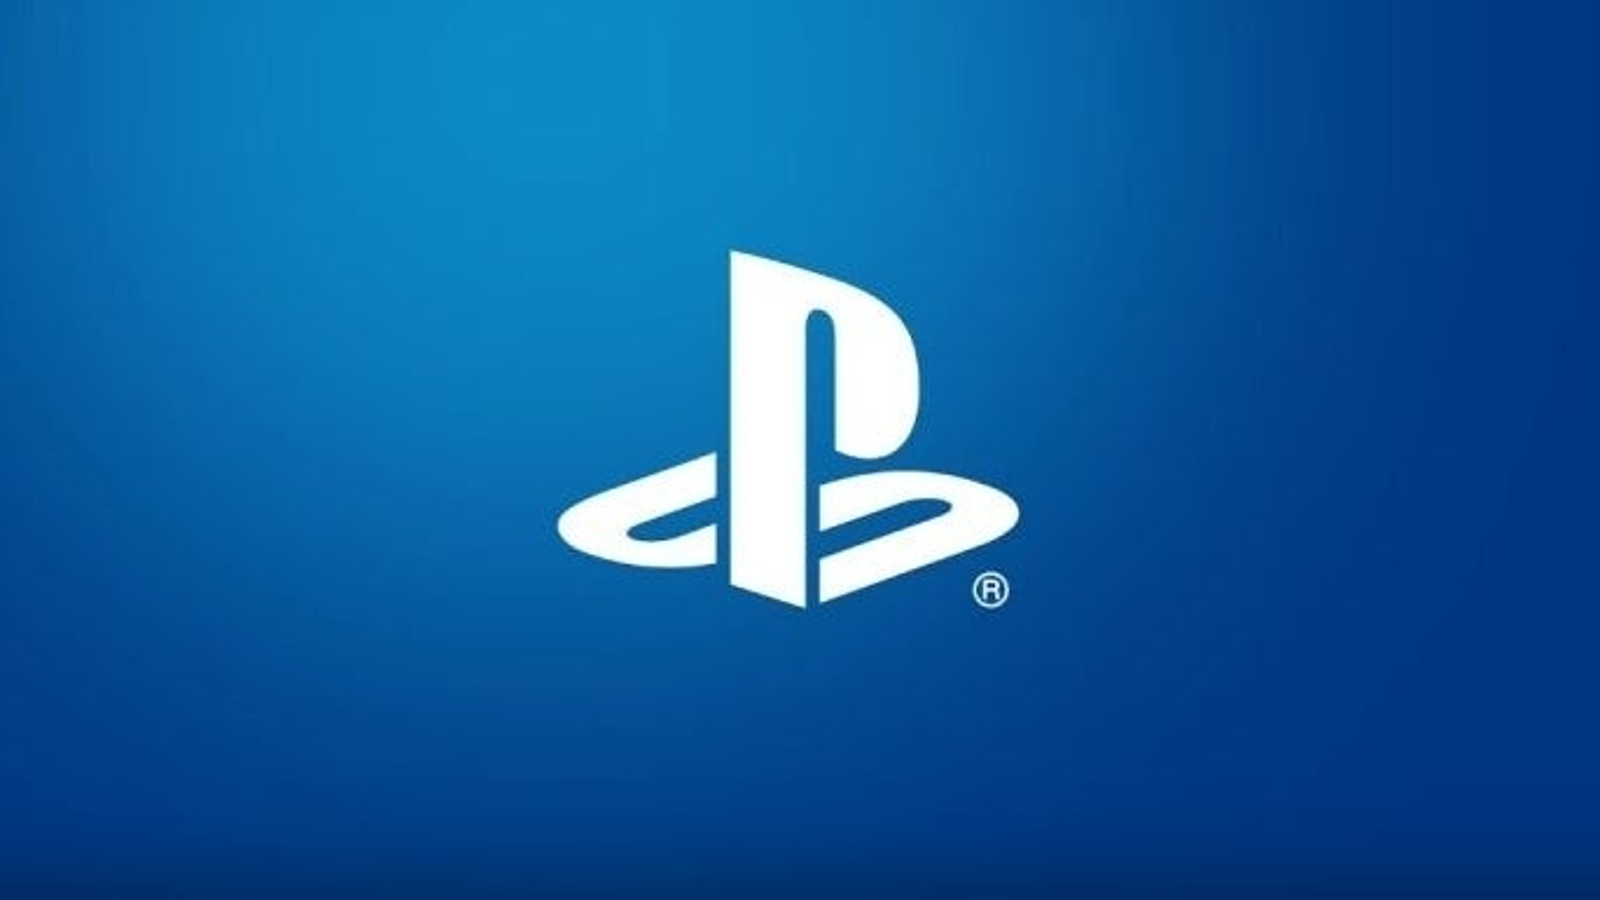 PS5 Slim is rumored to launch later this year for $399, but I'm not sure we  need it